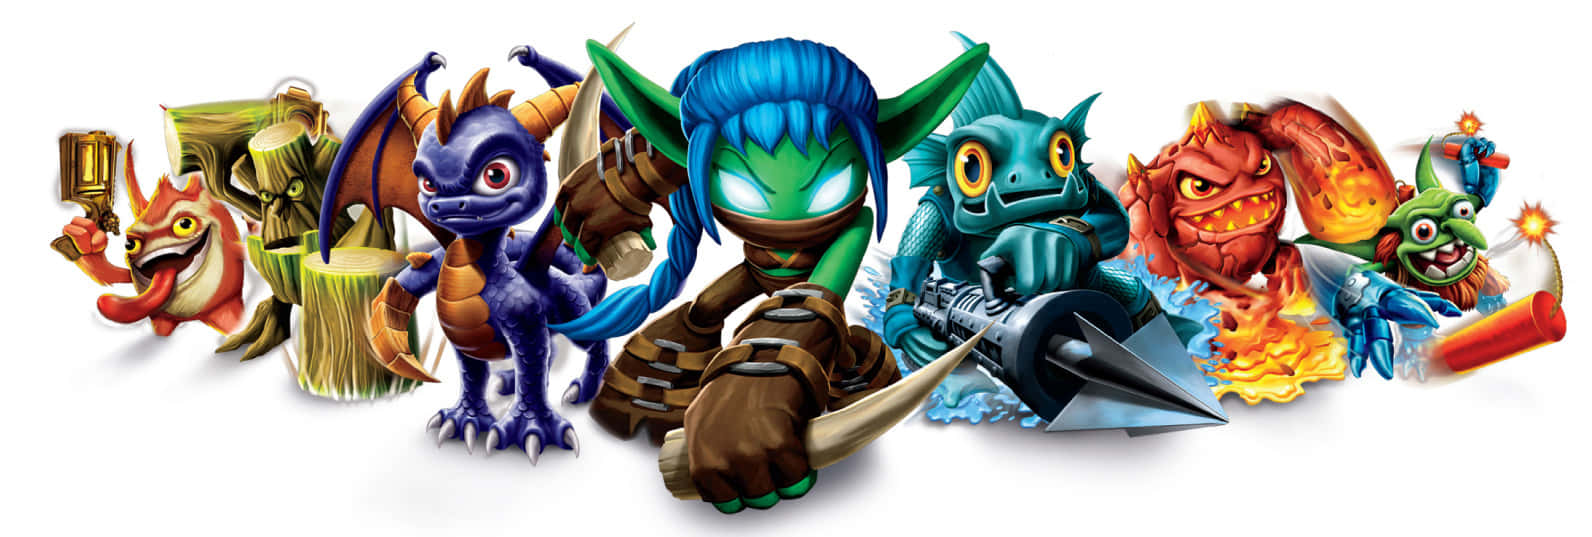 Enter a Magical World with Skylanders Wallpaper